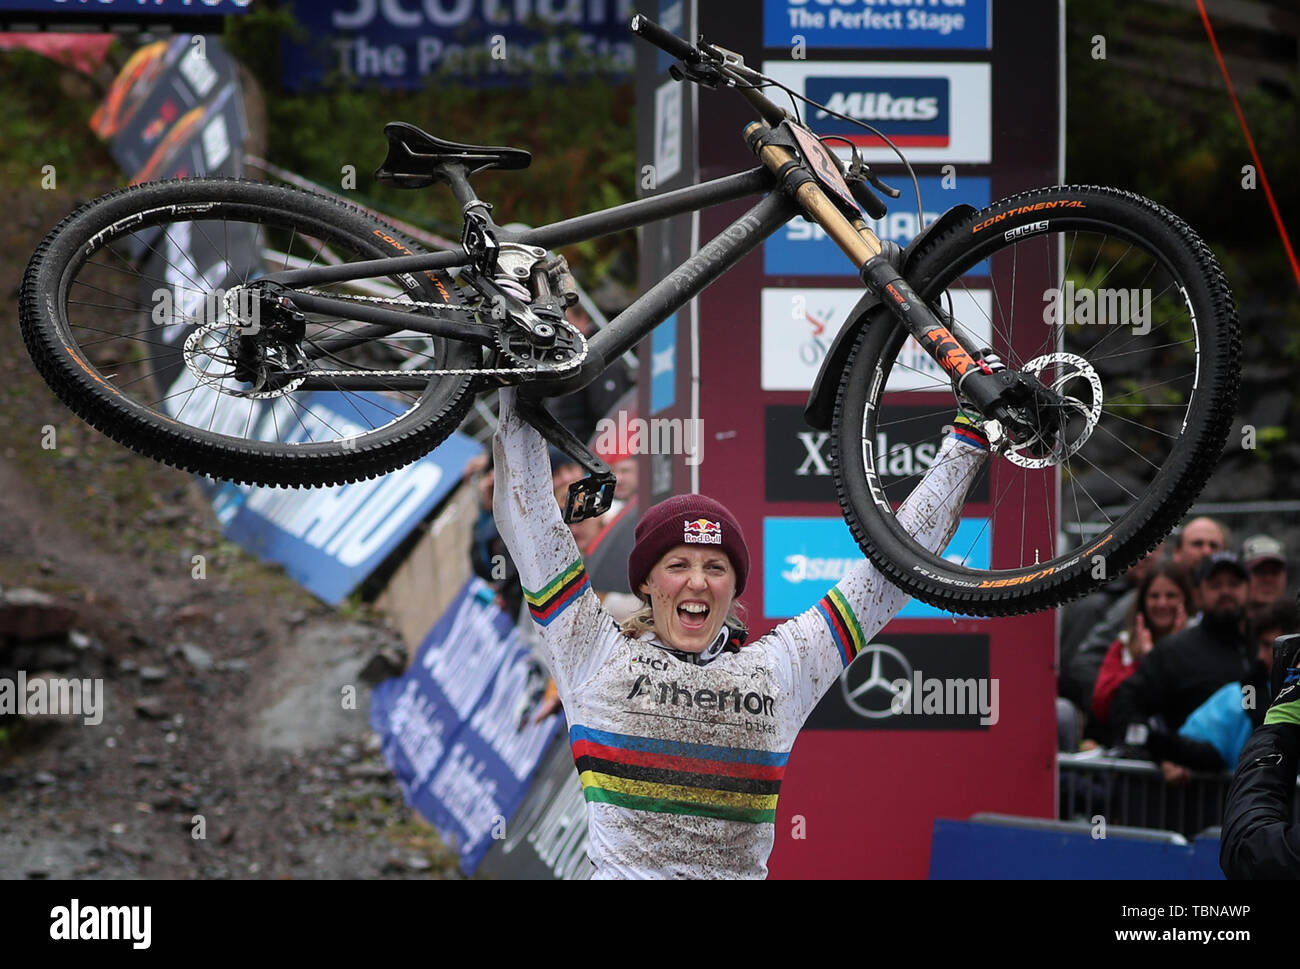 Great Britain's Rachel Atherton celebrates winning the Women's Downhill during the UCI Mountain Bike World Cup at Fort William. Stock Photo